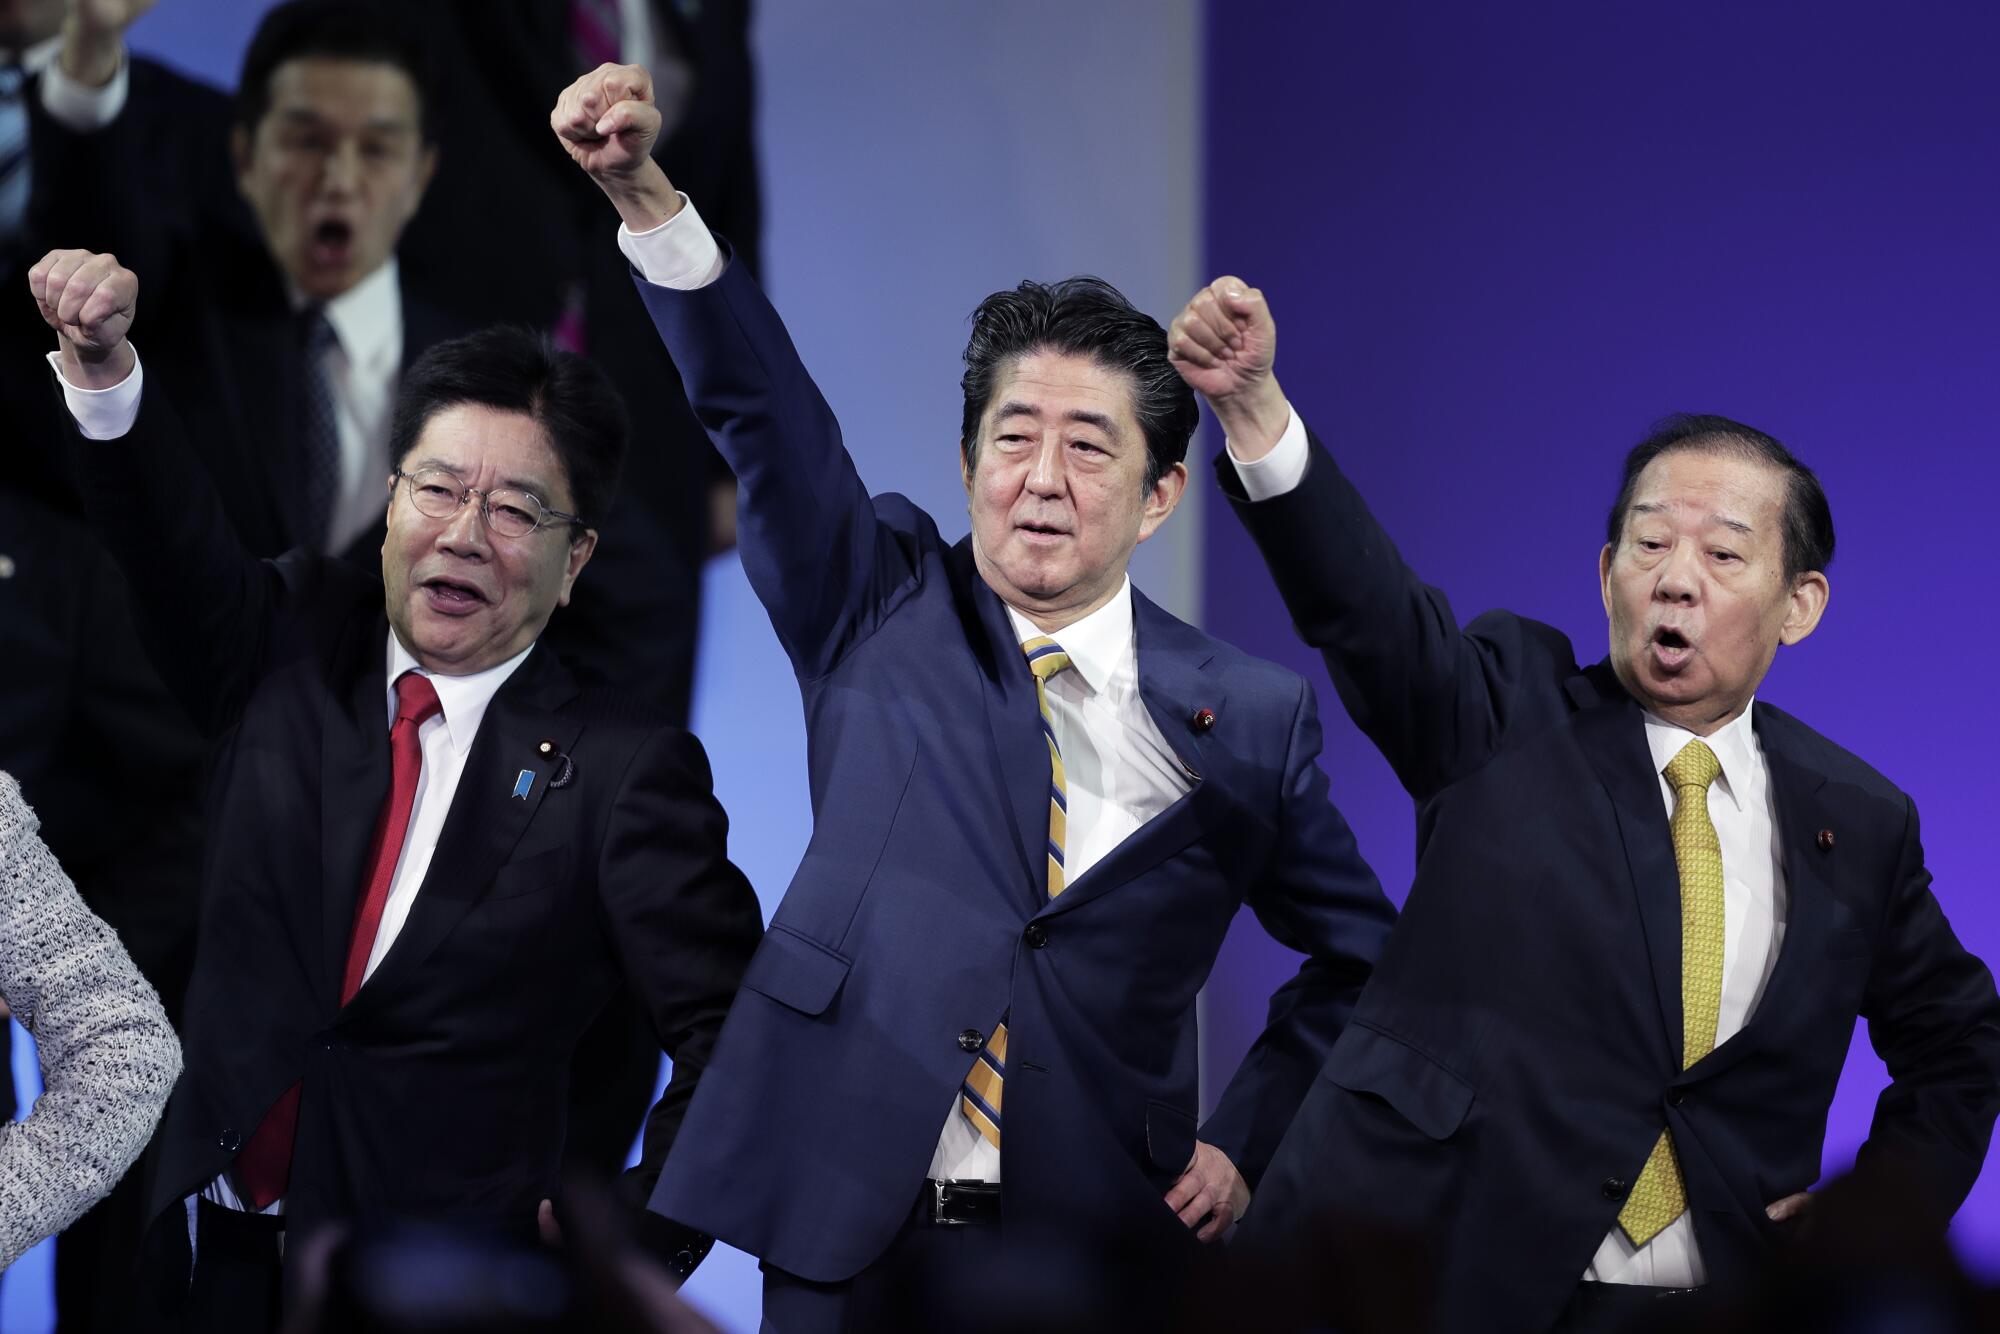 Shinzo Abe, Japan's prime minister and president of the Liberal Democratic Party (LDP), center, raises his fist